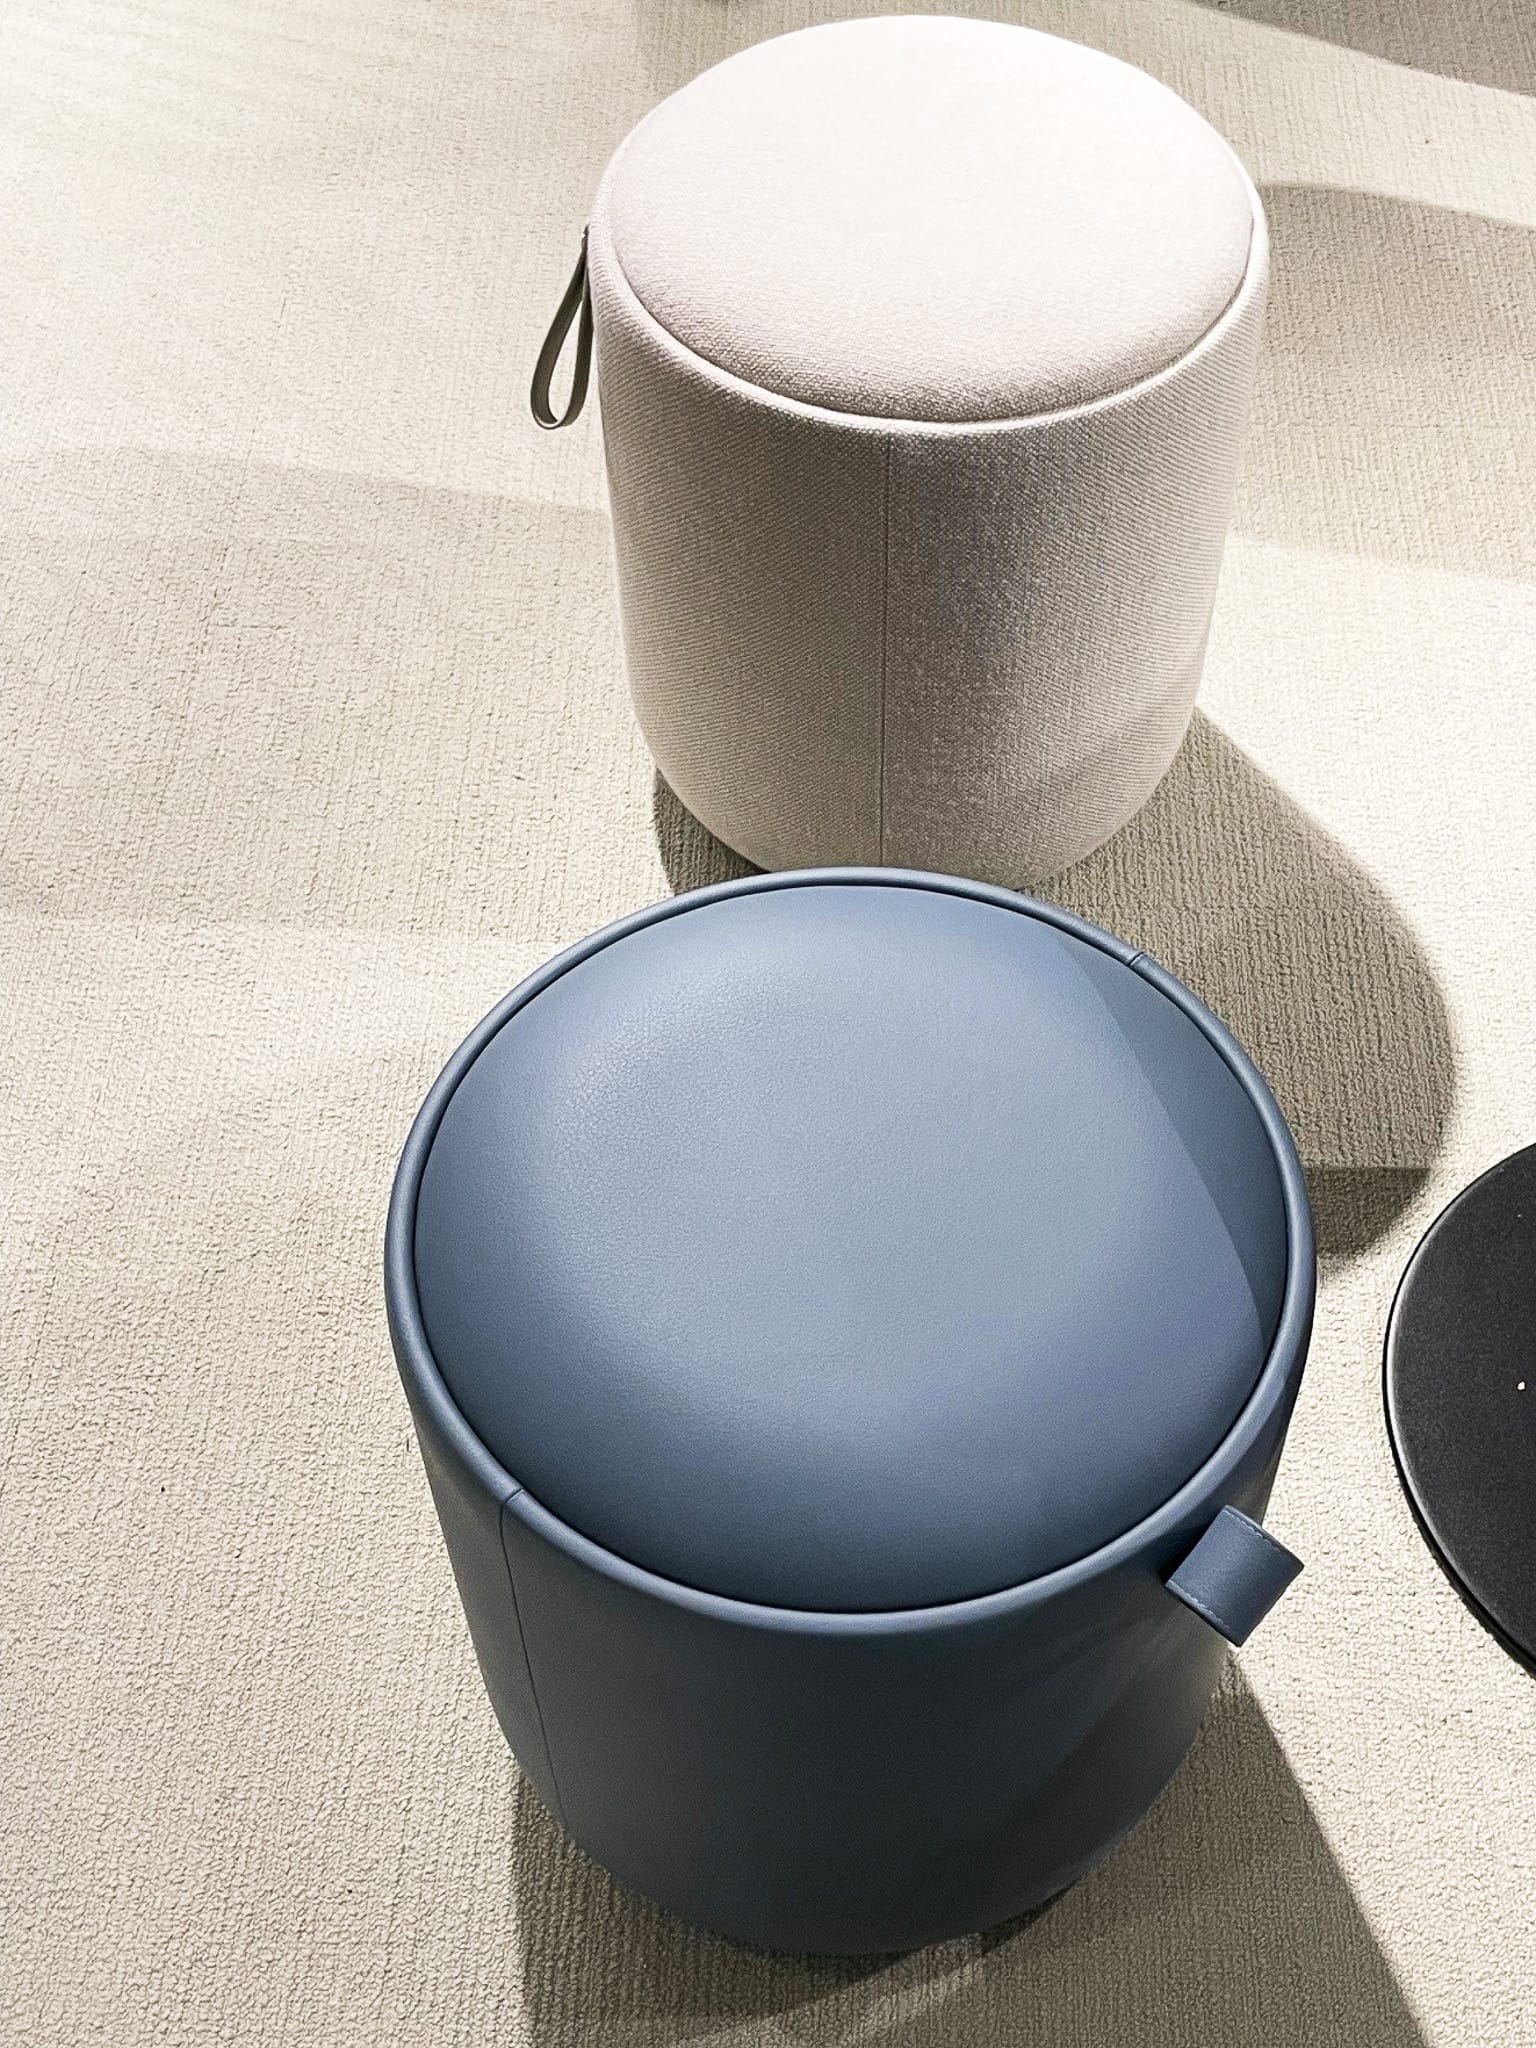 ottomans with handles at neocon show